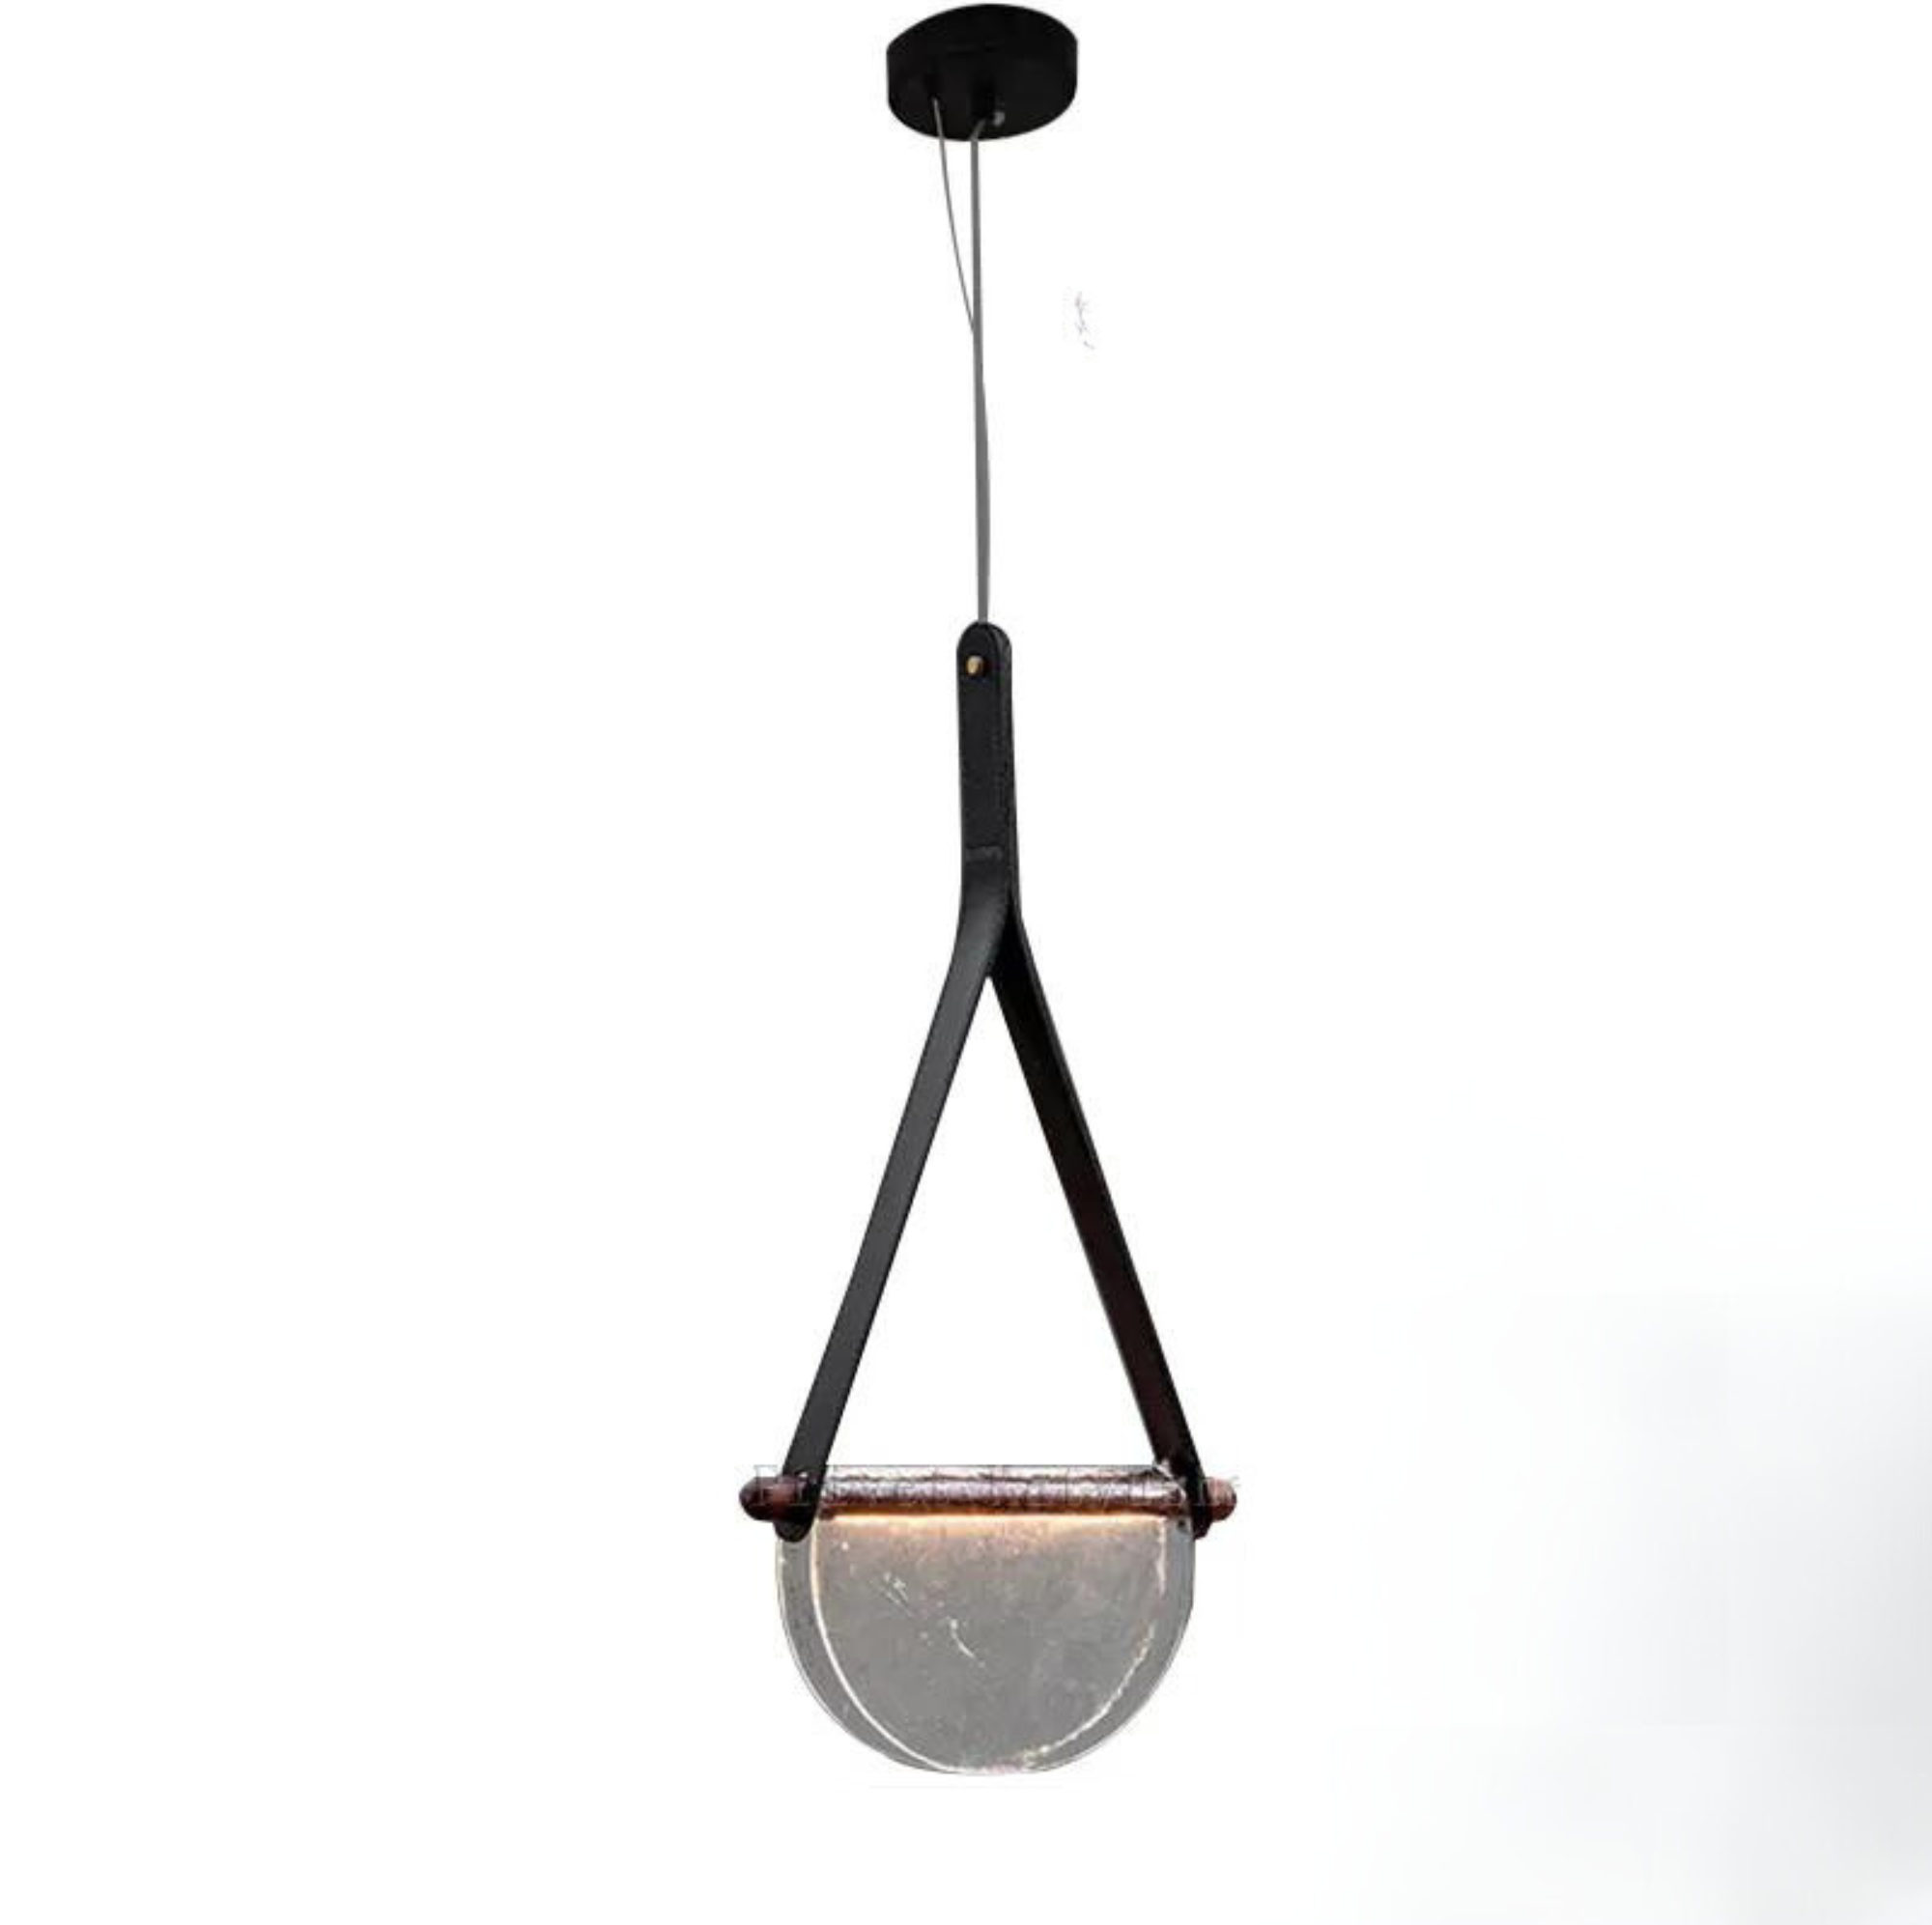 MD3202-C Premium Post Modern Design Leather and Glass Pendant Lamp Indoor Amber and Smoky Gray Decorative Light Fixture for Bedroom, Restaurant, Bedroom, Bar, Cafe, Restaurant, hotel (Single Piece)